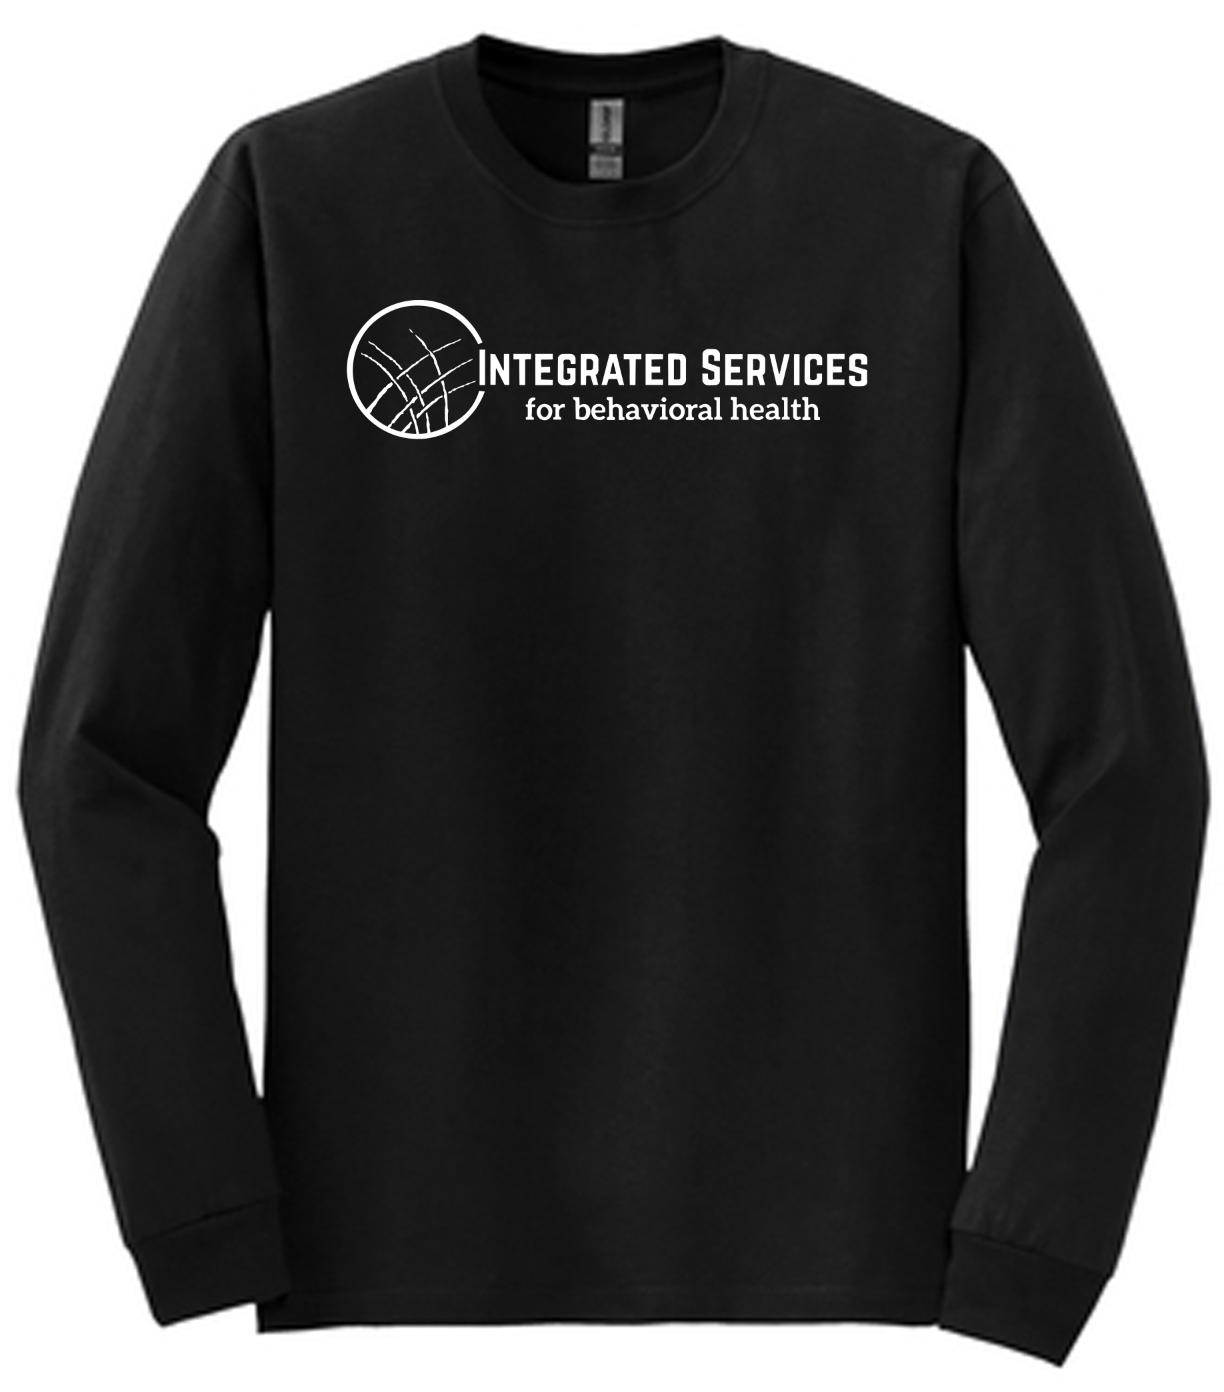 Full Chest Logo - Integrated Services Long Sleeve T-Shirt